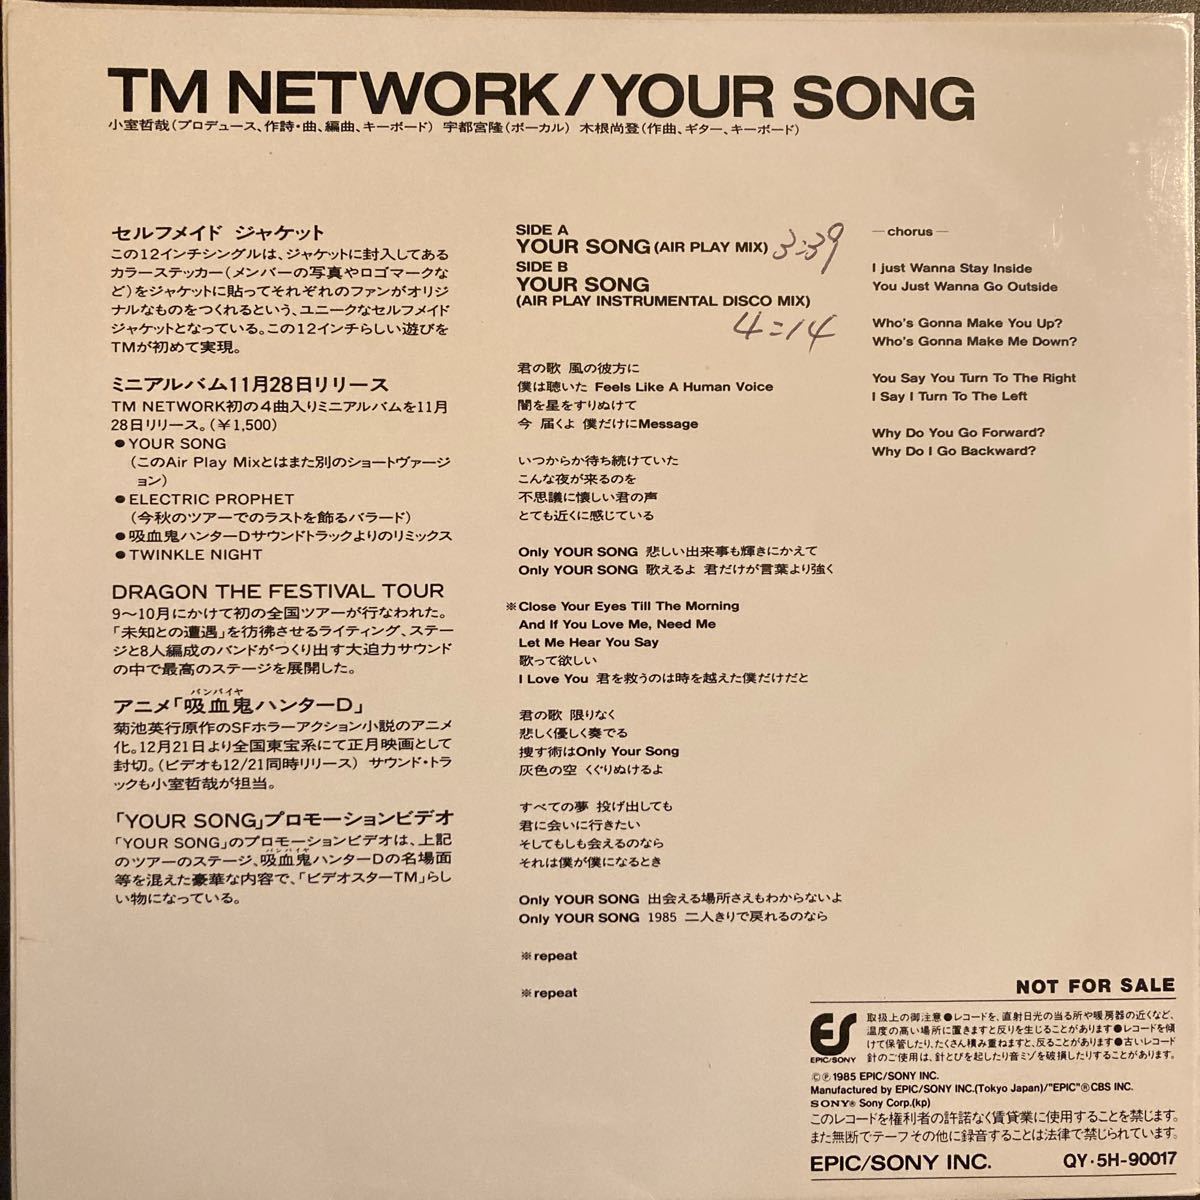 TM NETWORK / Your Song(Air Play Mix) 邦楽 EP 7inch 見本盤 非売品 プロモ レコード レア_画像2